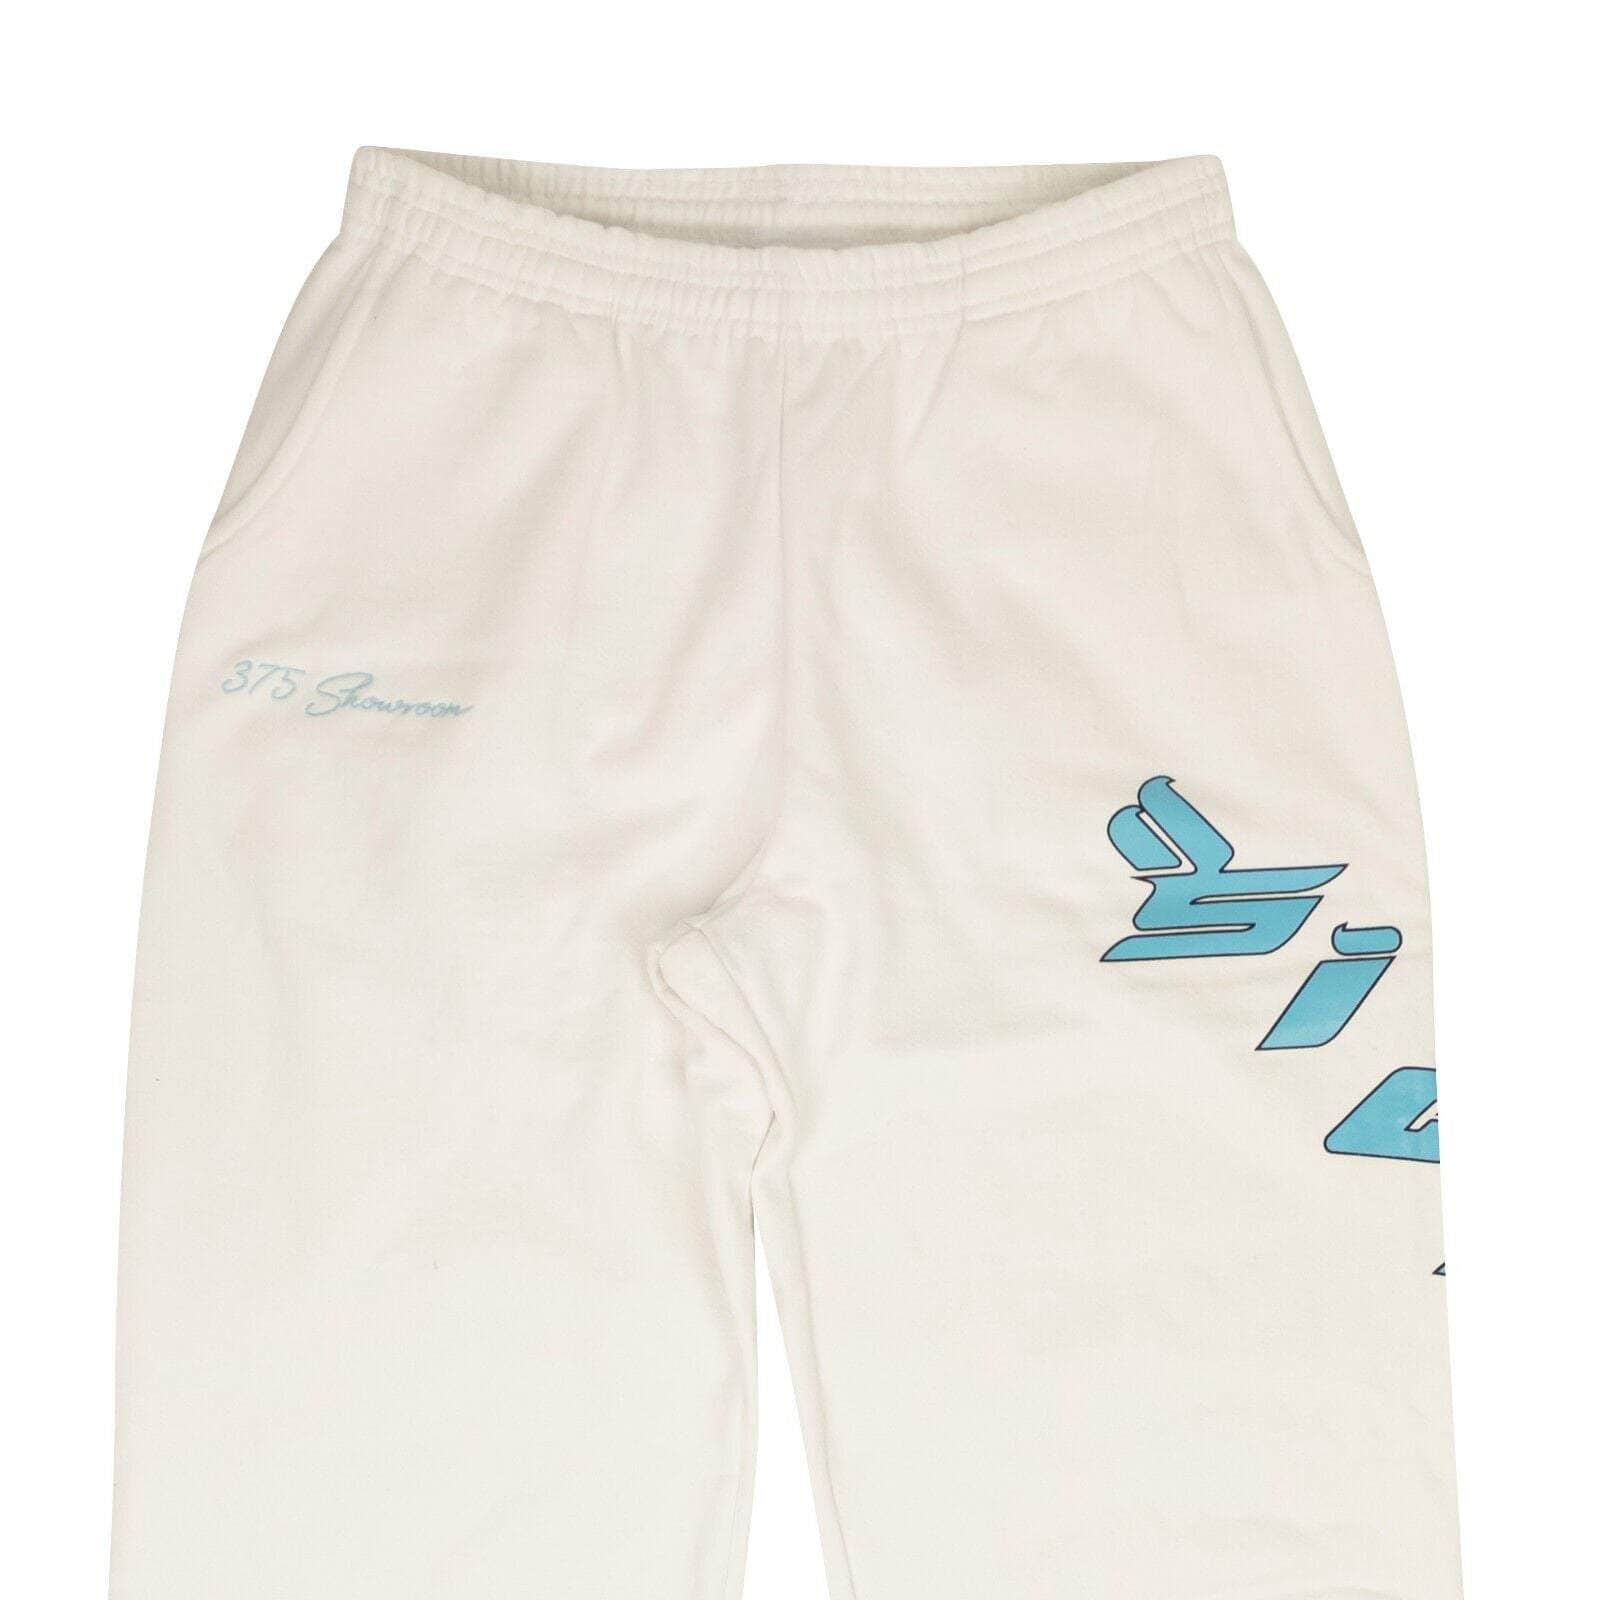 Sicko x 375 channelenable-all, chicmi, couponcollection, gender-mens, main-clothing, mens-joggers-sweatpants, mens-shoes, sicko-x-375, size-l, size-m, size-s, size-xl, under-250 White Cotton Light Blue Logo Print Sweatpants